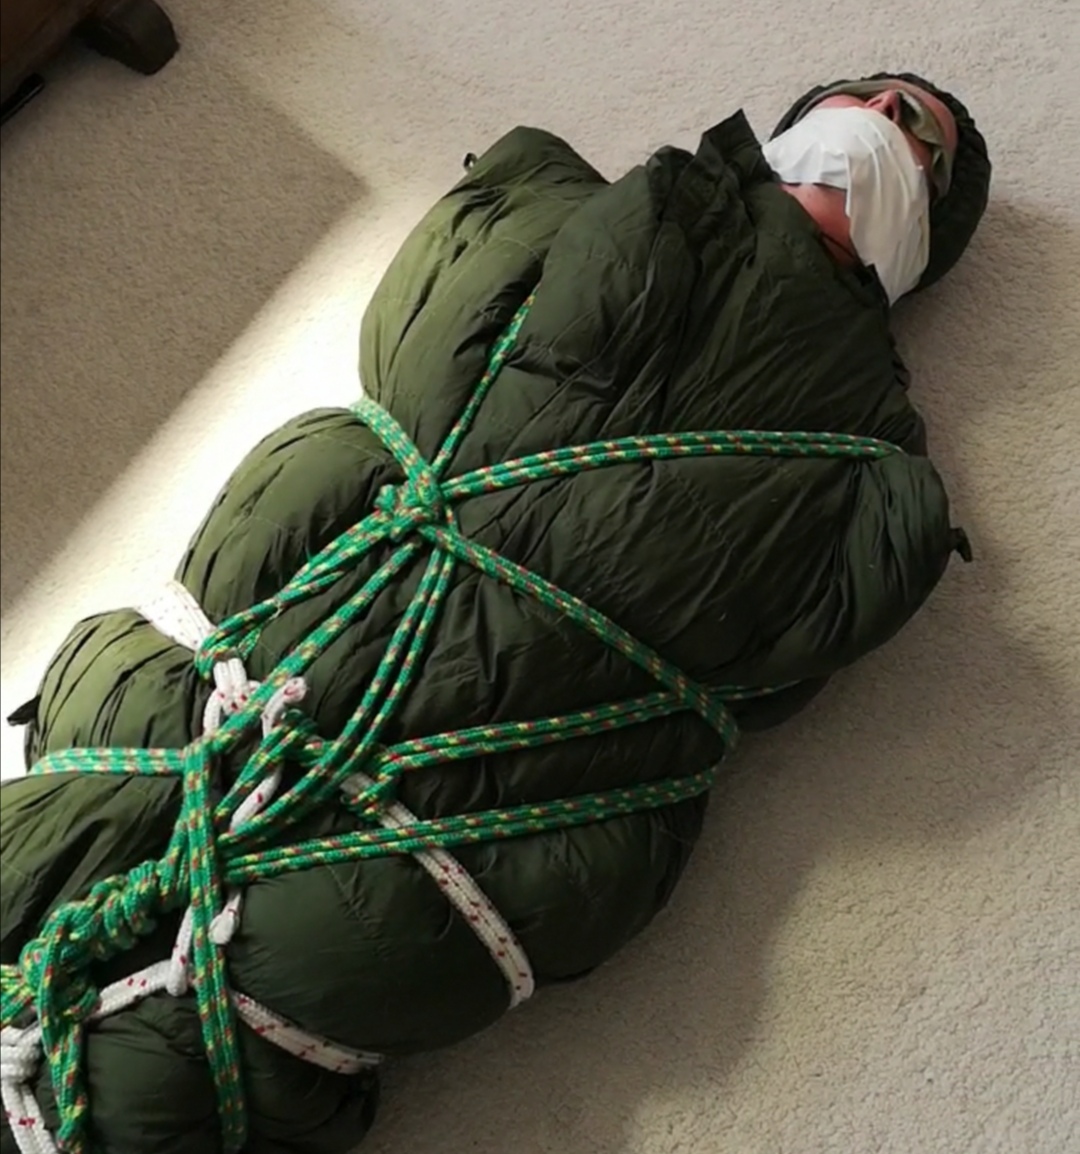 Scoutmaster left tied up in sleeping bag